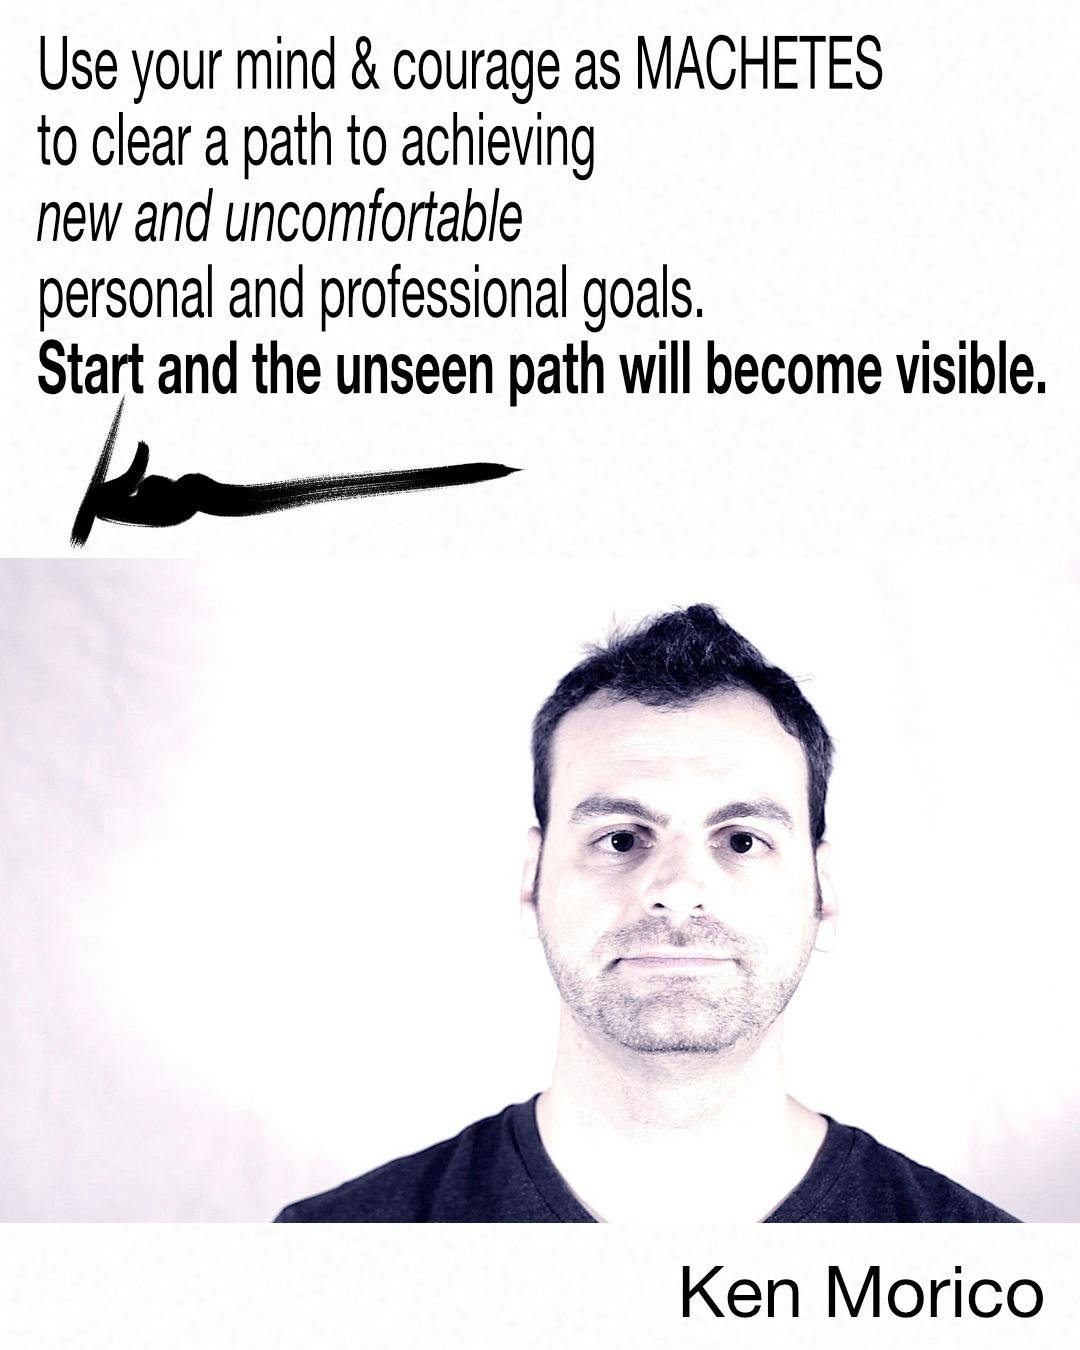 Start and the unseen path will become visible.